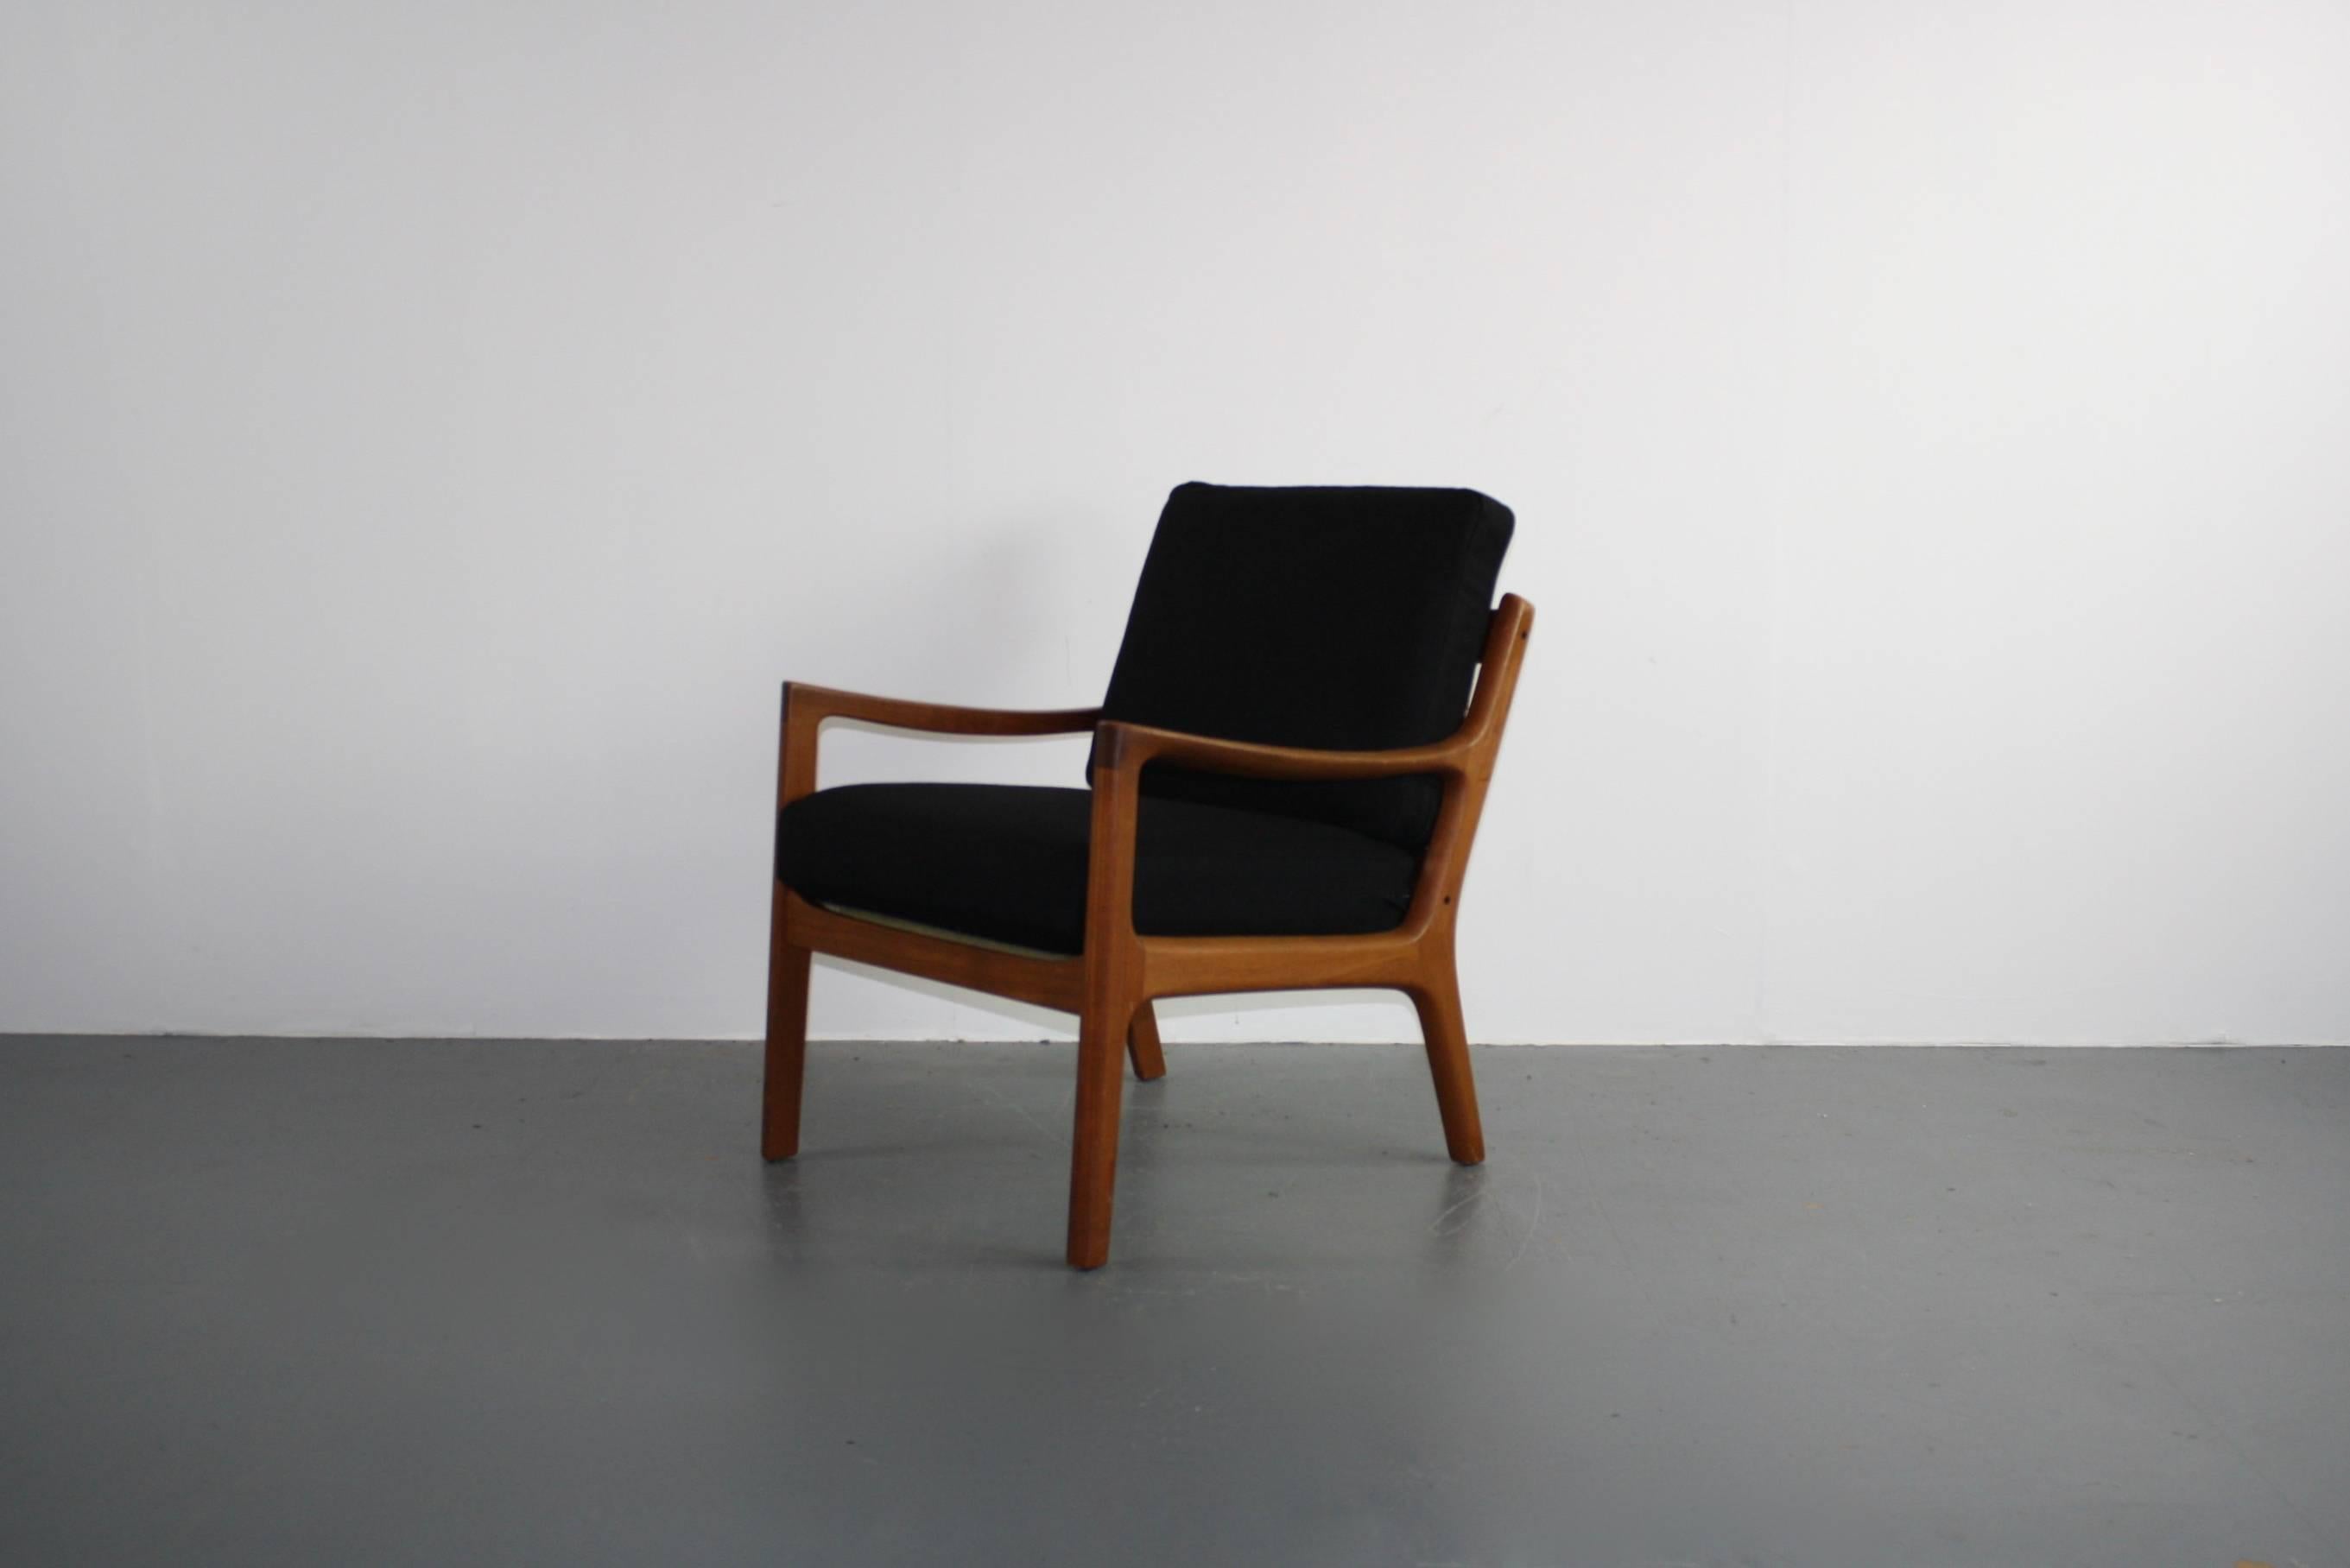 1960s teak lounge chair designed by Ole Wanscher for Cado (France & Son). Solid teak, with beautifully designed curved arms. With 2 thick spring-loaded cushions, making the chair supremely comfortable, which have been newly upholstered in Abraham